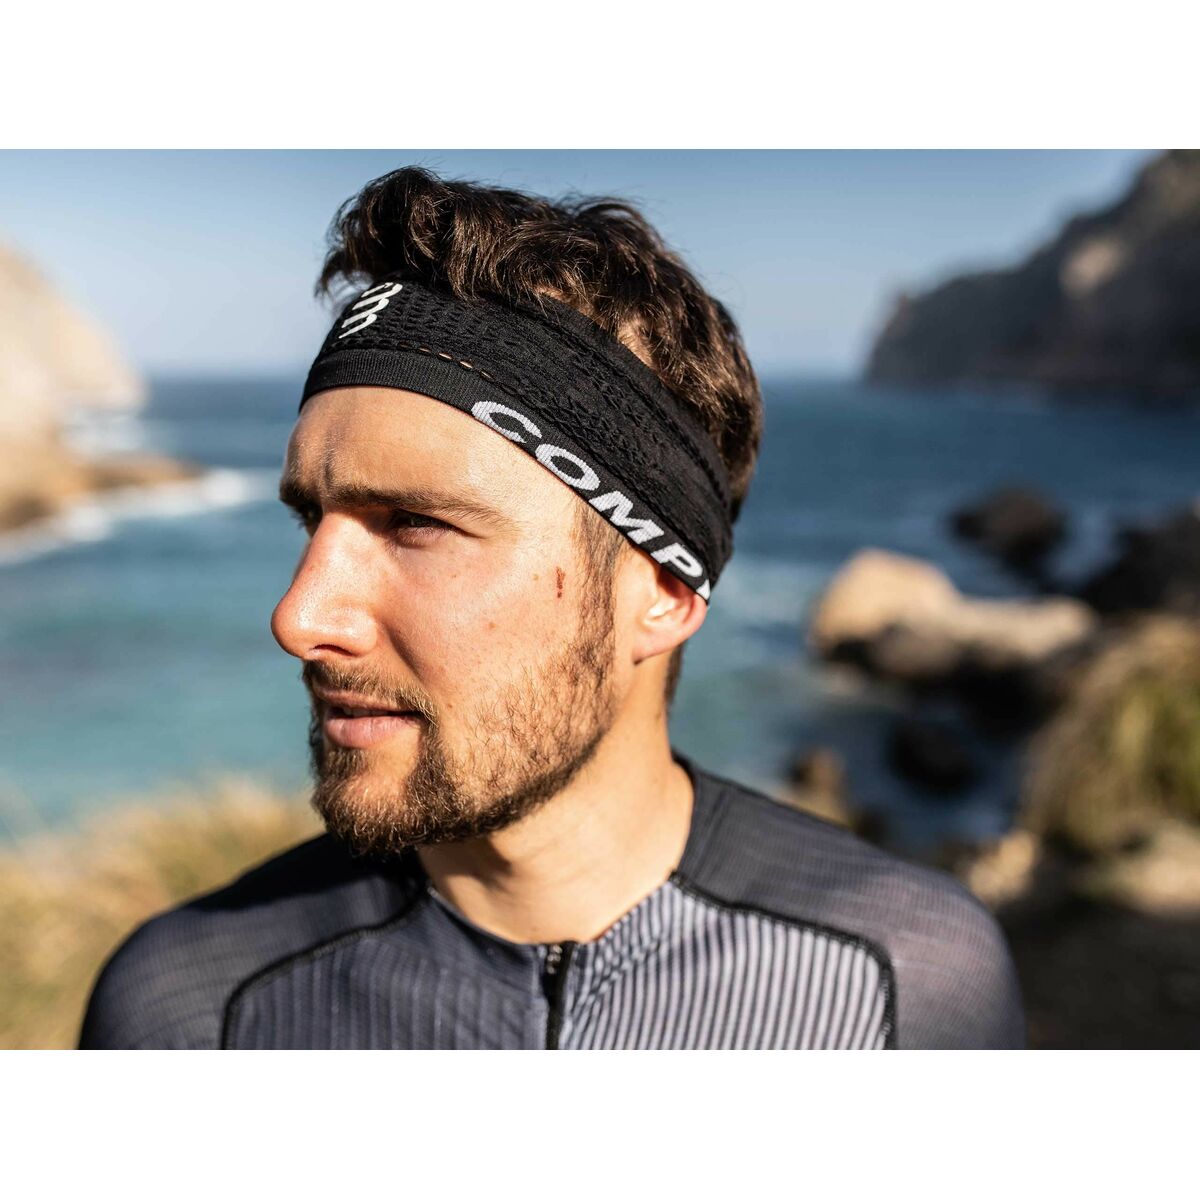 Sports Strip for the Head Compressport Thin On/Off Black